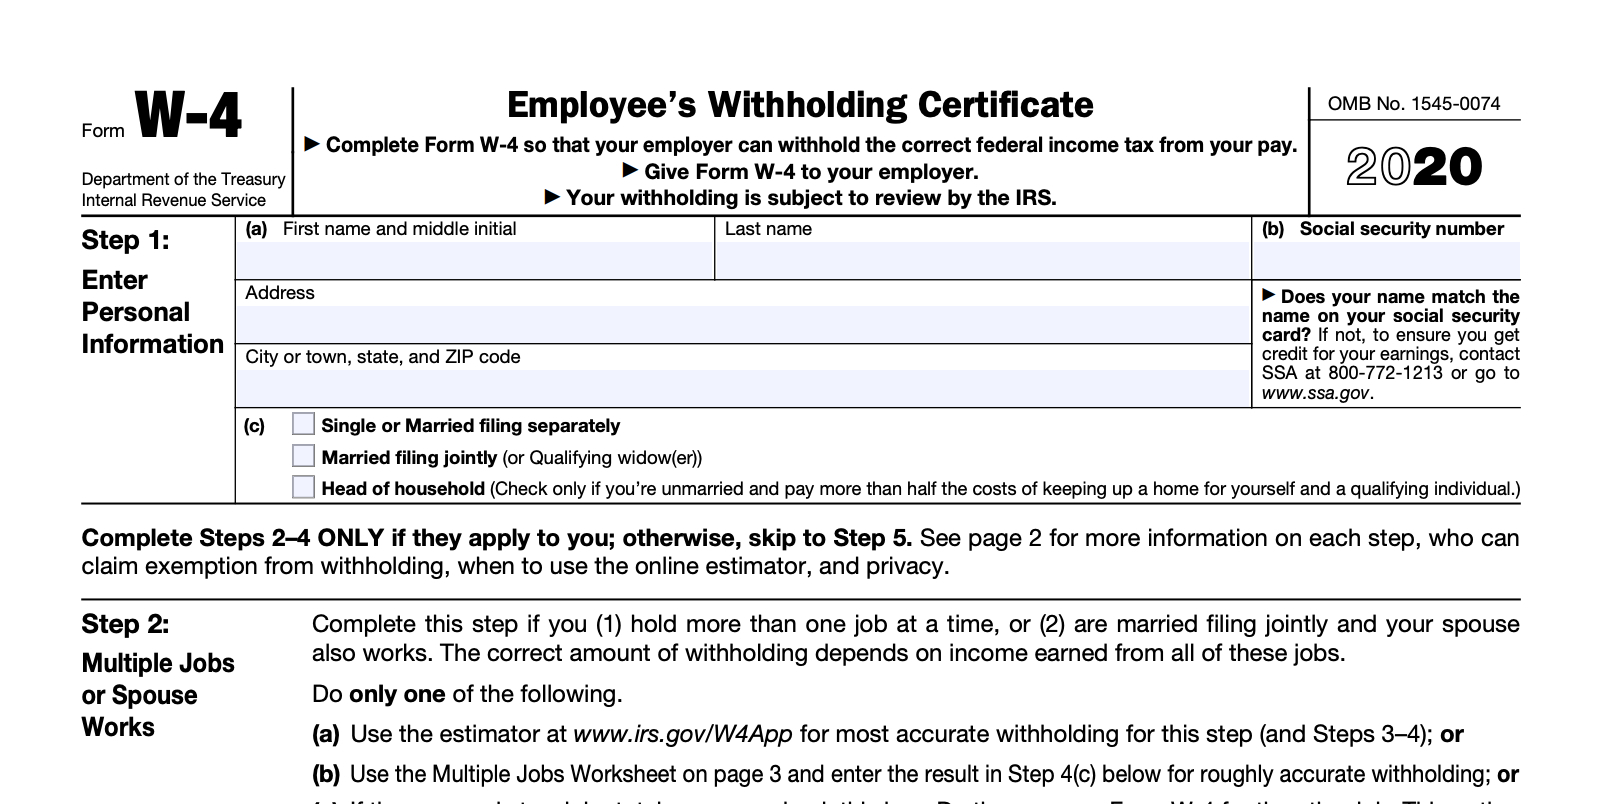 Ohio Department Of Taxation Employee Withholding Form